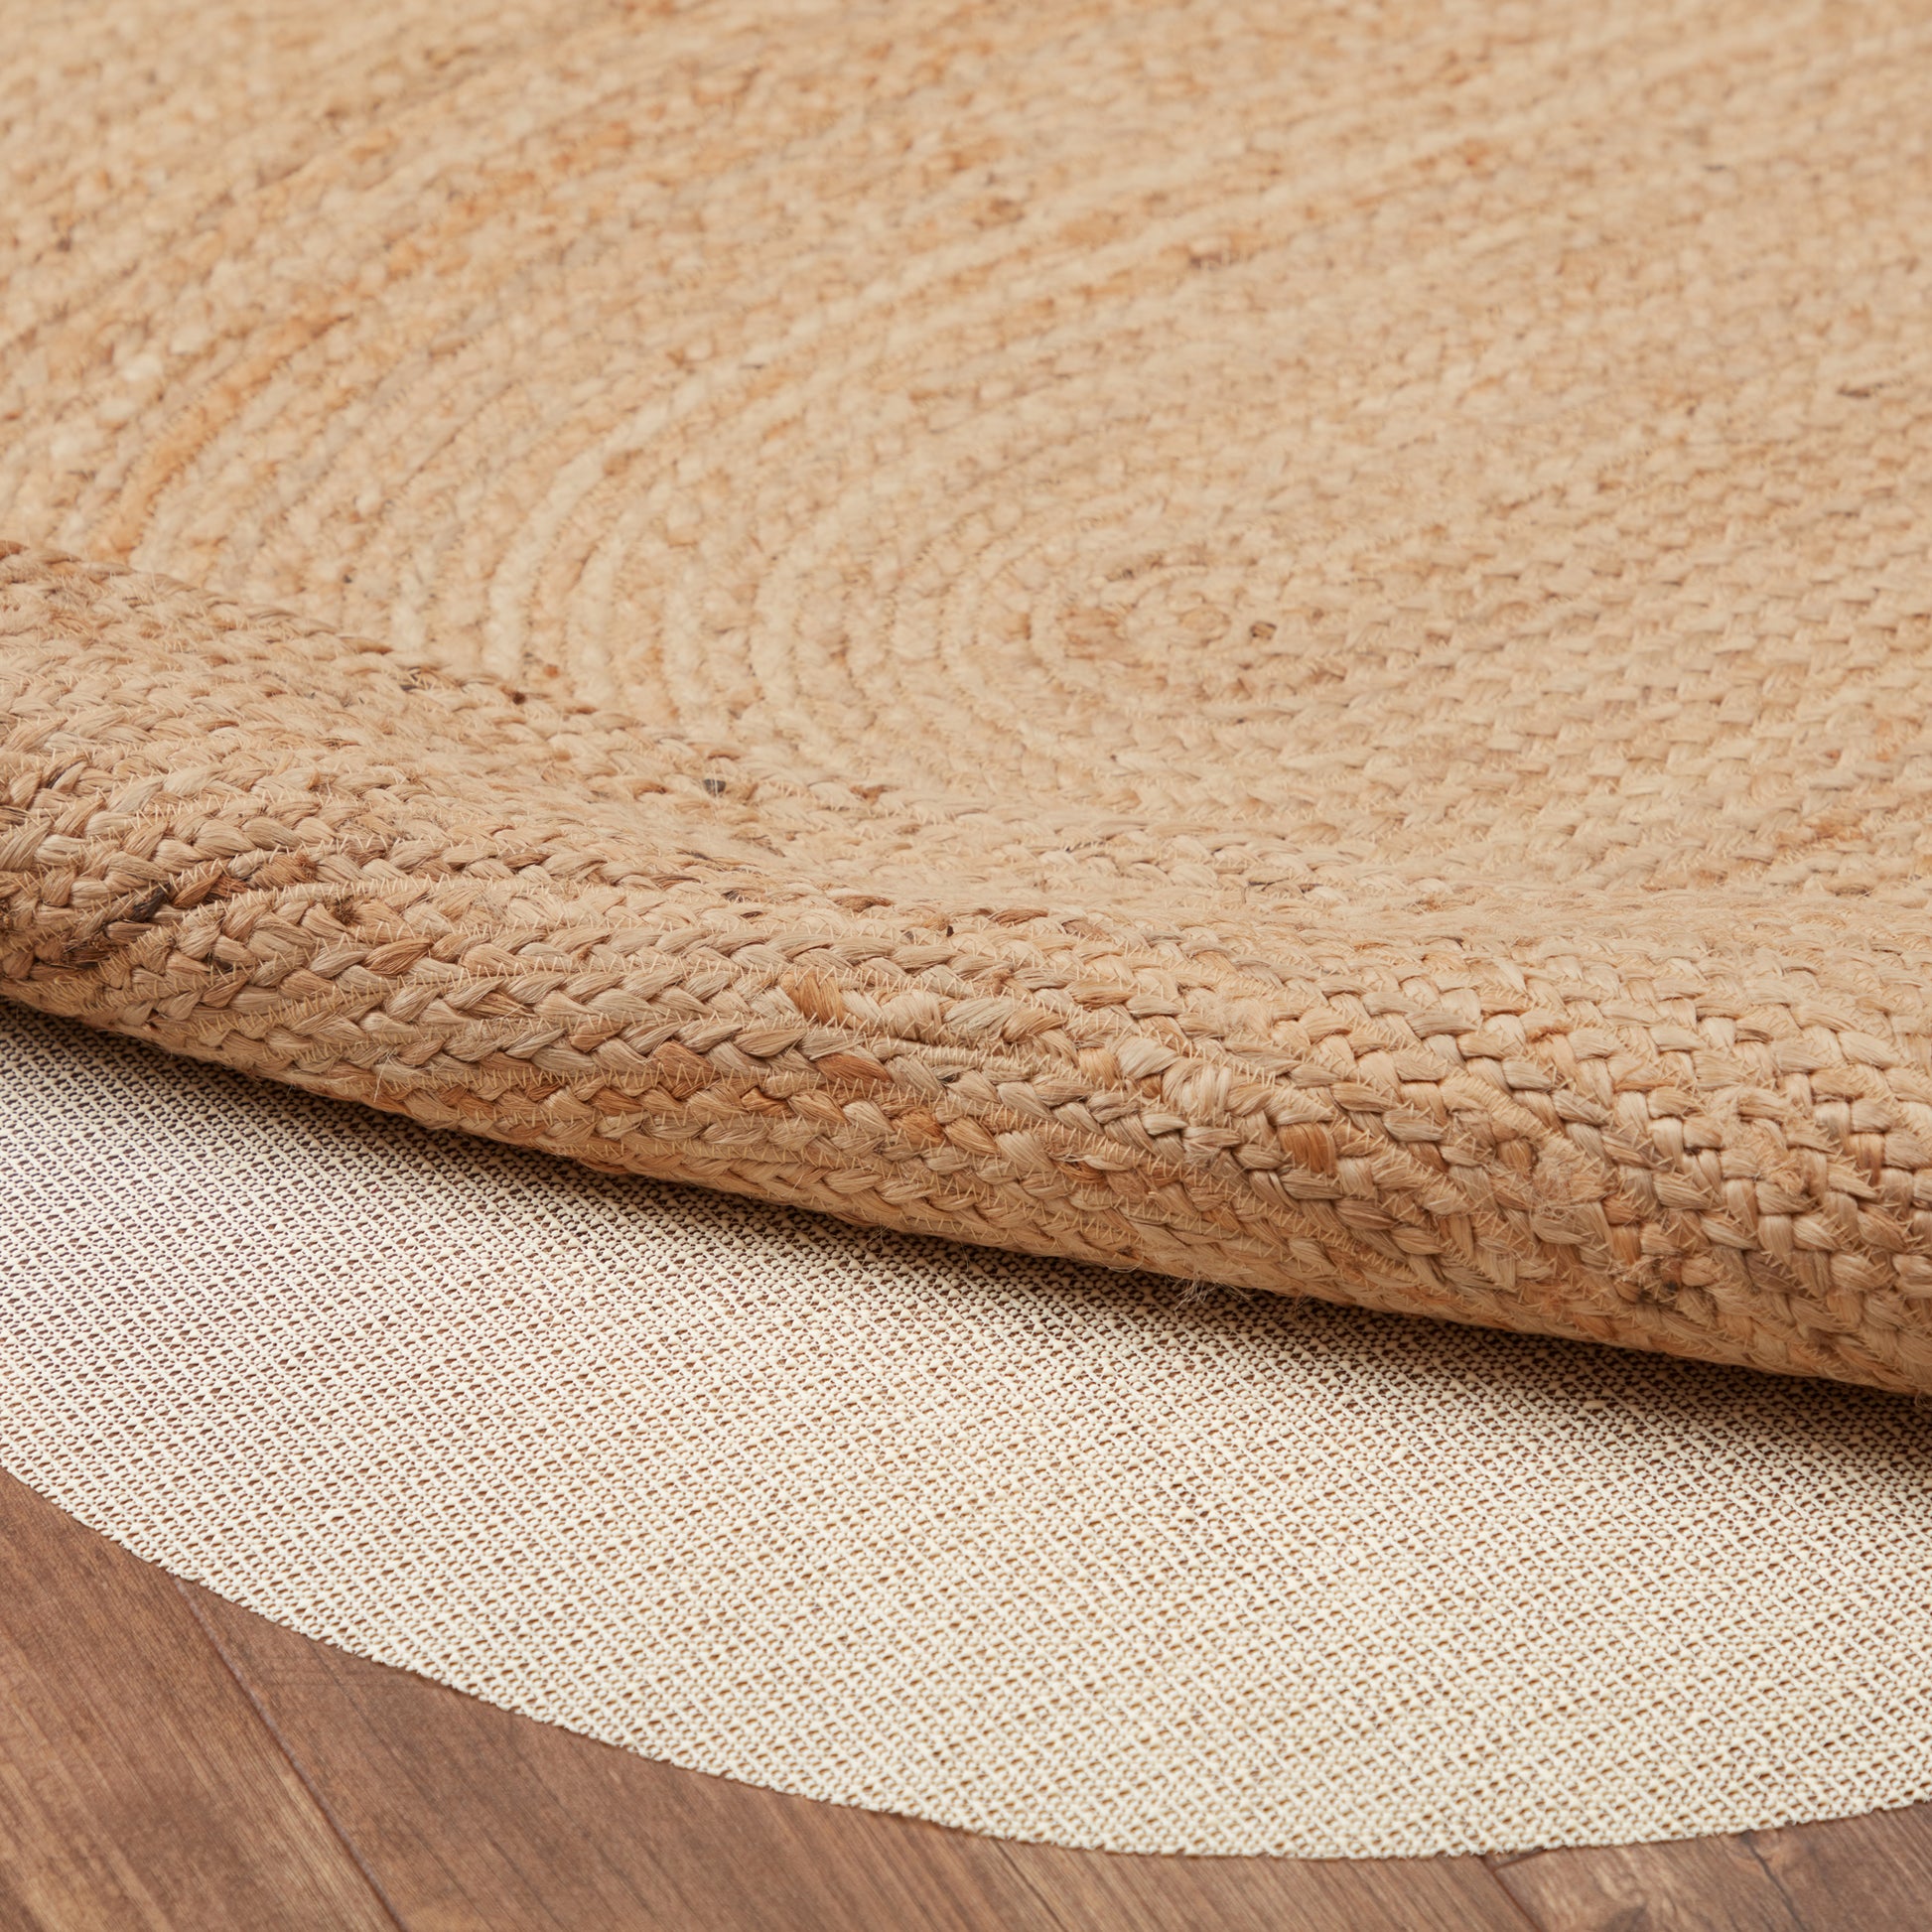 69386-Natural-Jute-Rug-Oval-w-Pad-36x60-image-5